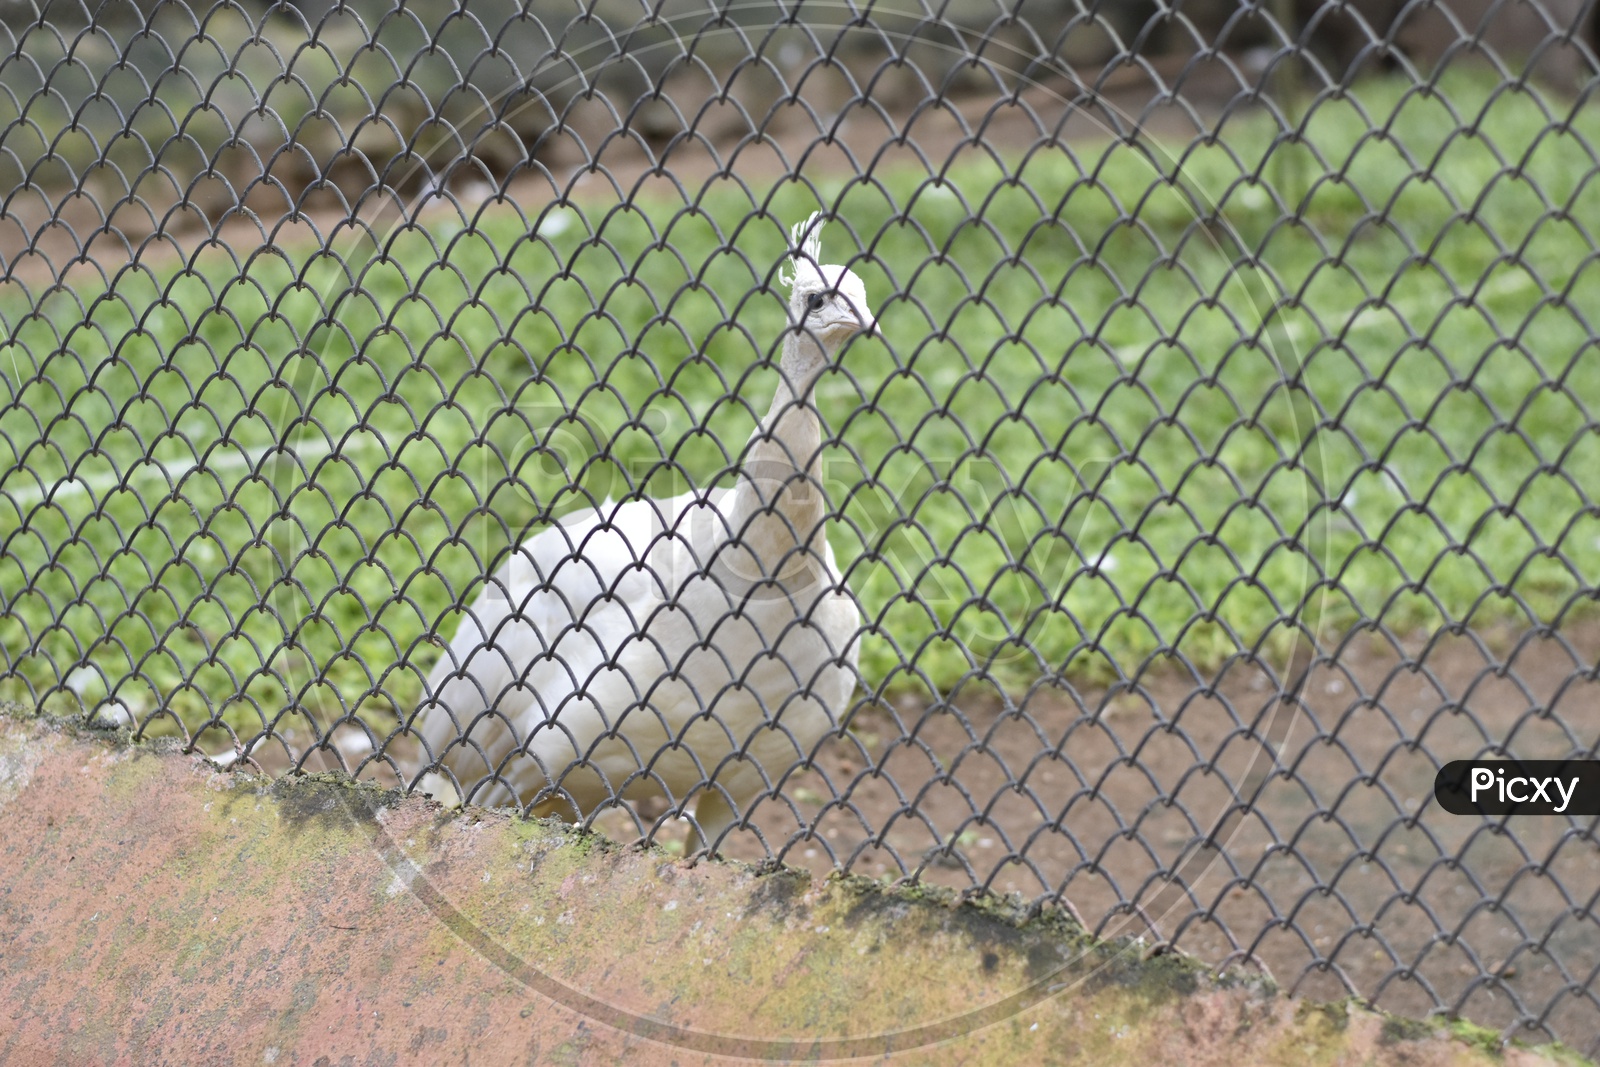 Indian National Bird White Peacock behind fencing Bars in Zoo